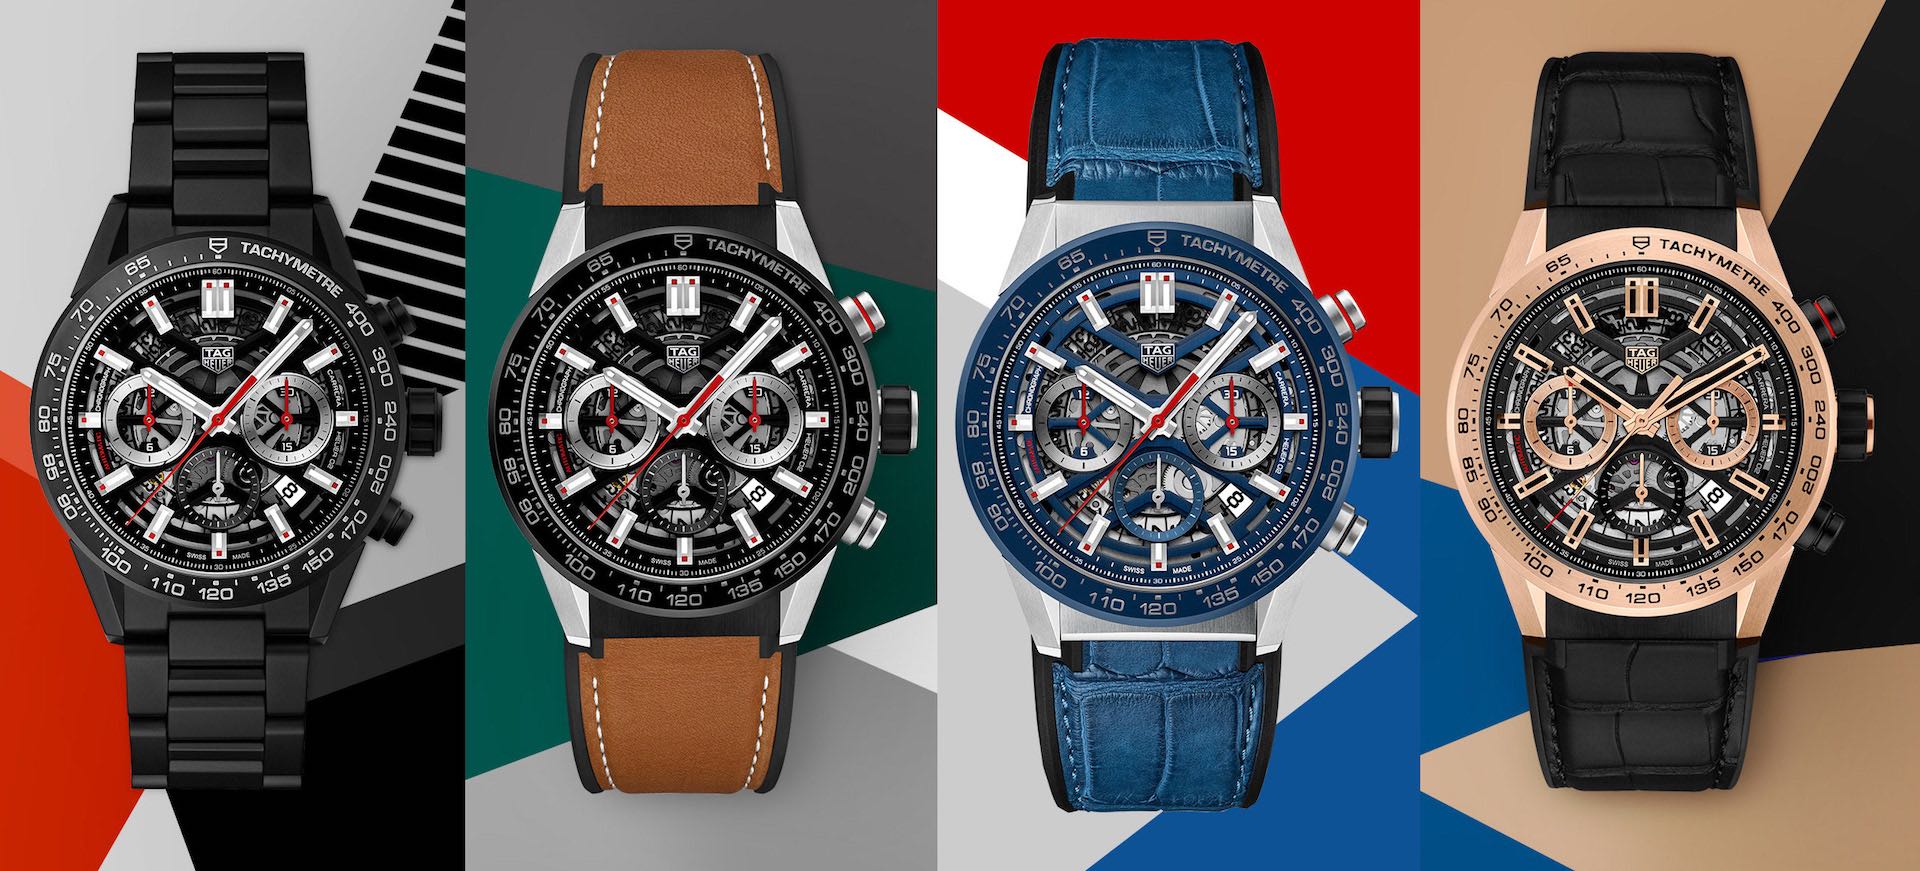 TAG Heuer Carrera Heuer 02 To Debut At Baselworld 2018